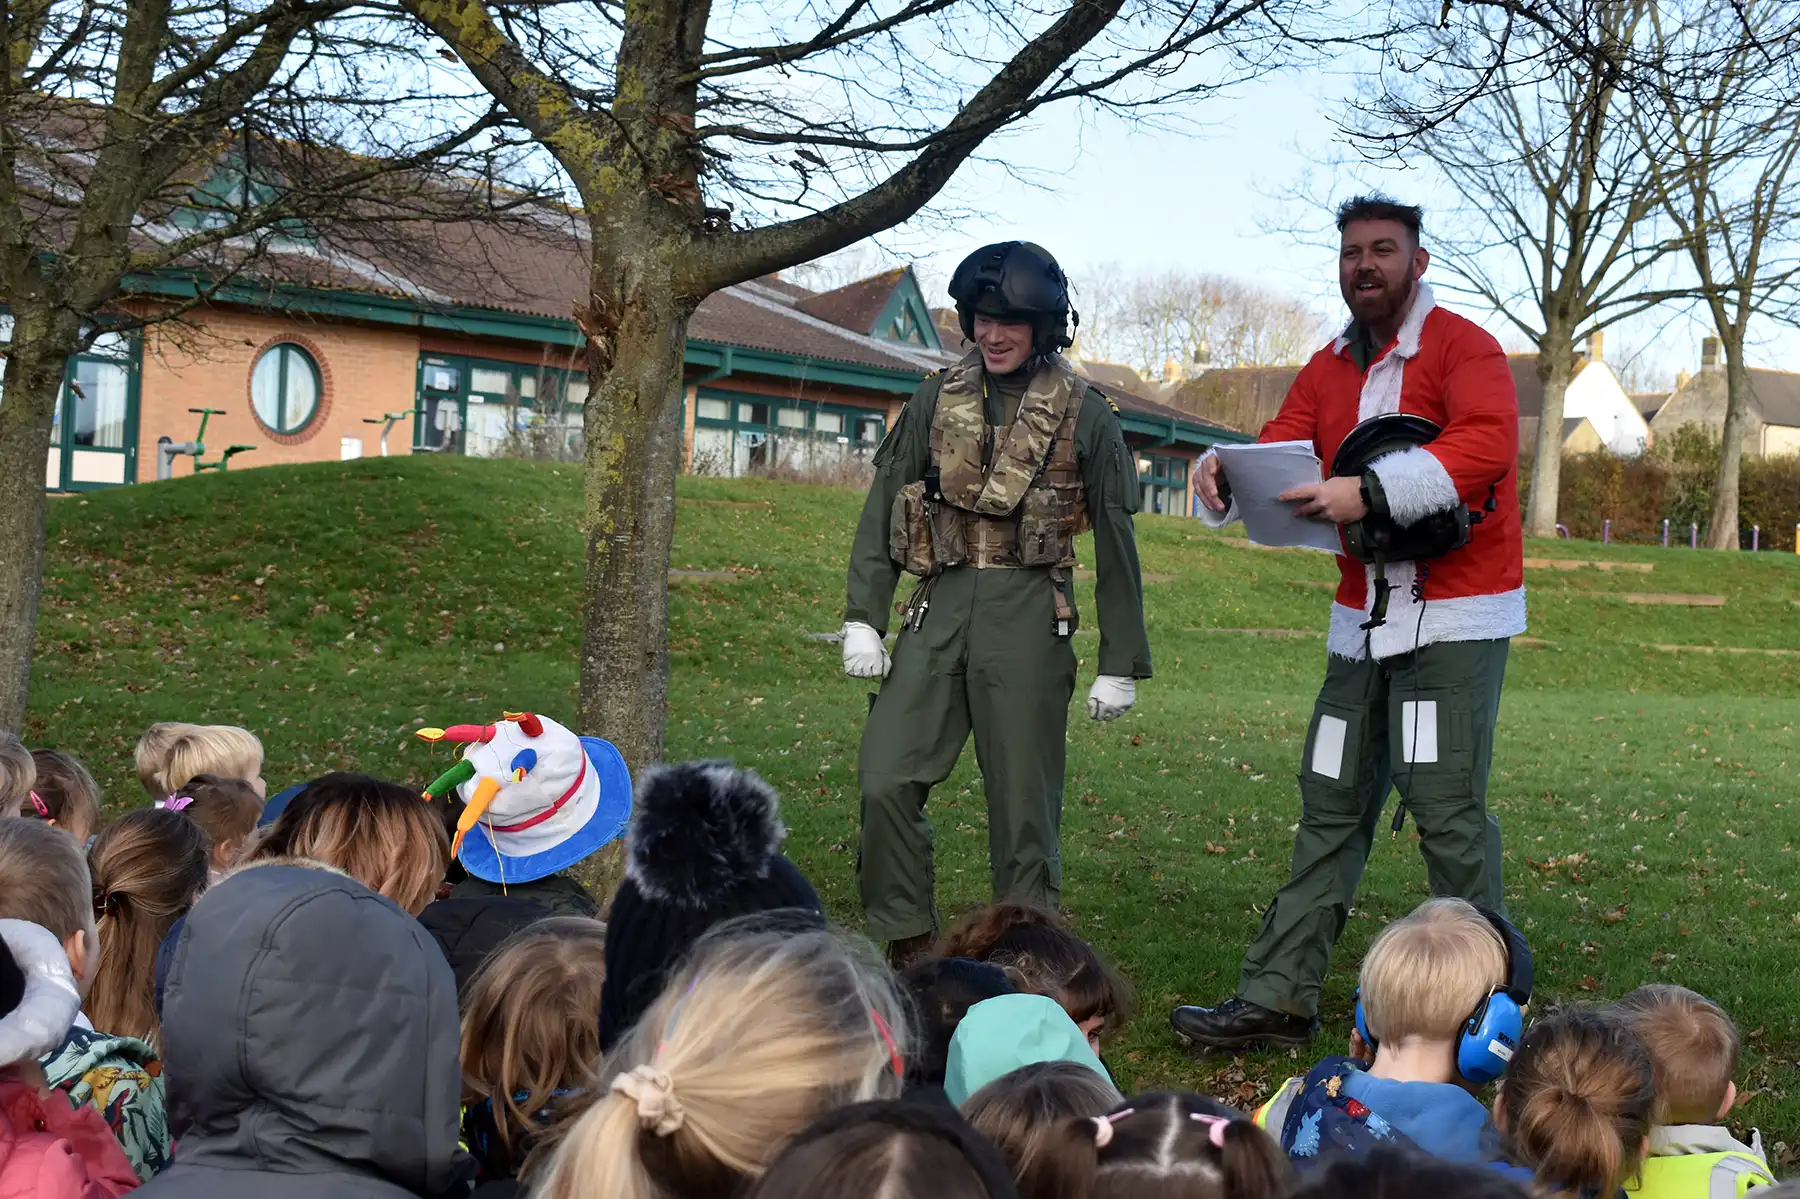 Pilots Lt Cdr William Thornton and Lt Cdr David Lilly chatted with children at Sherborne Primary School